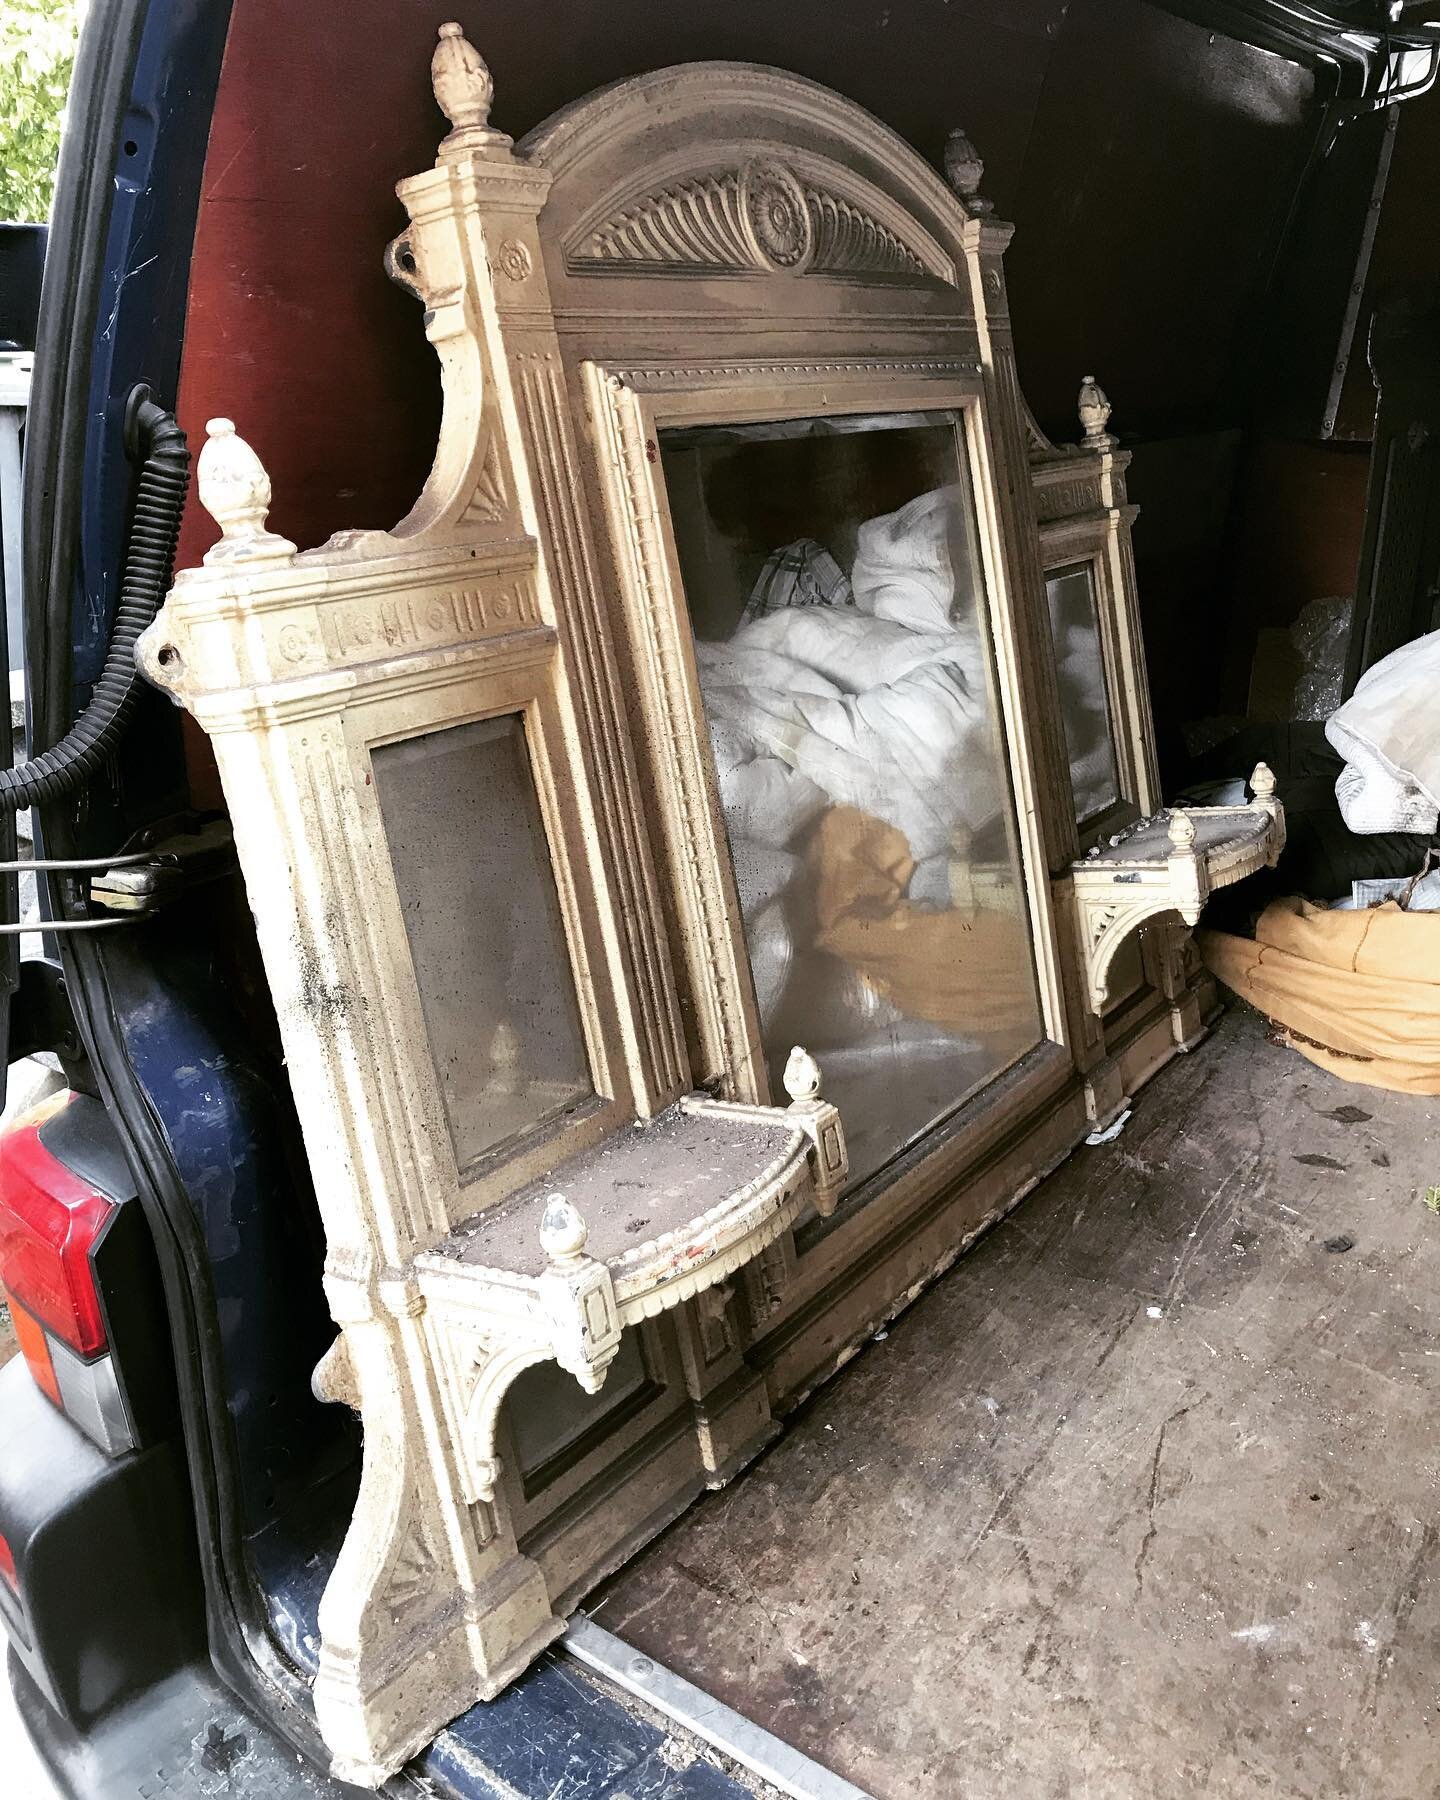 Unusually large cast iron over mantle mirror, will look stunning once refurbished 
#antiques #interiordesign #interiors #interiordecor #antiquedealer #london #anitquegardenfurniture #architecturalantiques #architecturalsalvage #paris #frenchantiques 